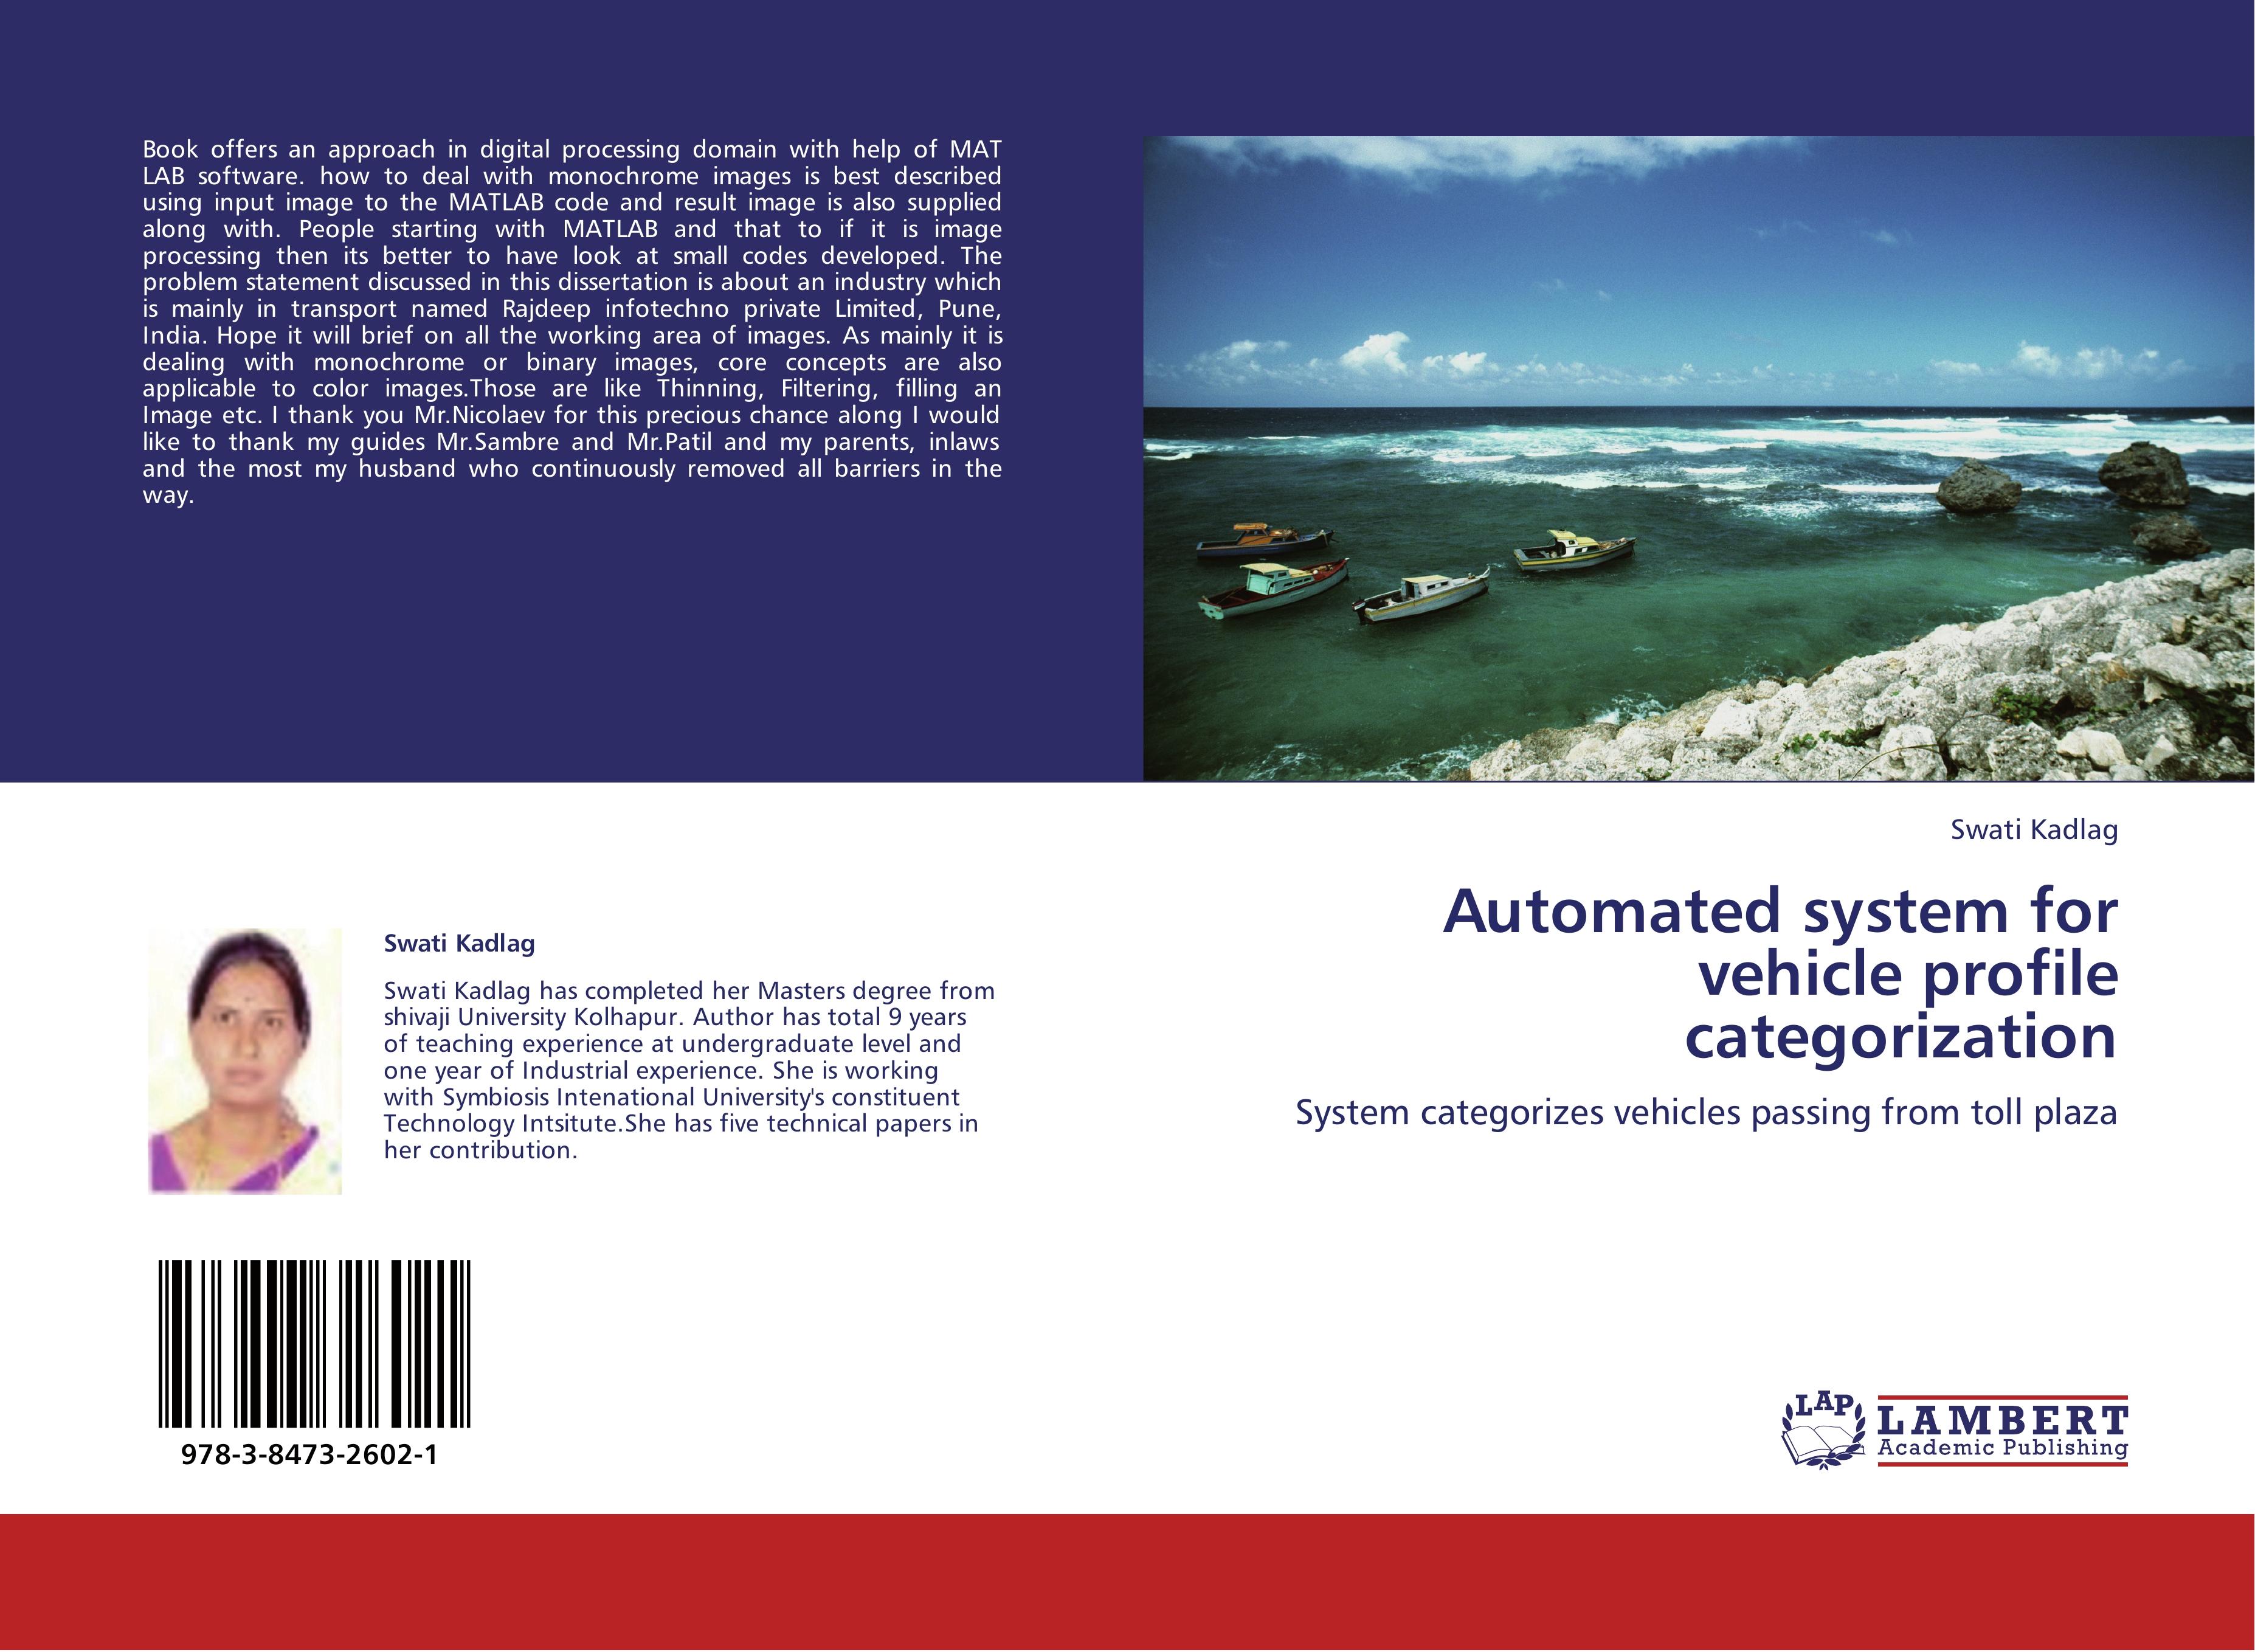 Automated system for vehicle profile categorization | System categorizes vehicles passing from toll plaza | Swati Kadlag | Taschenbuch | Paperback | 68 S. | Englisch | 2012 | EAN 9783847326021 - Kadlag, Swati